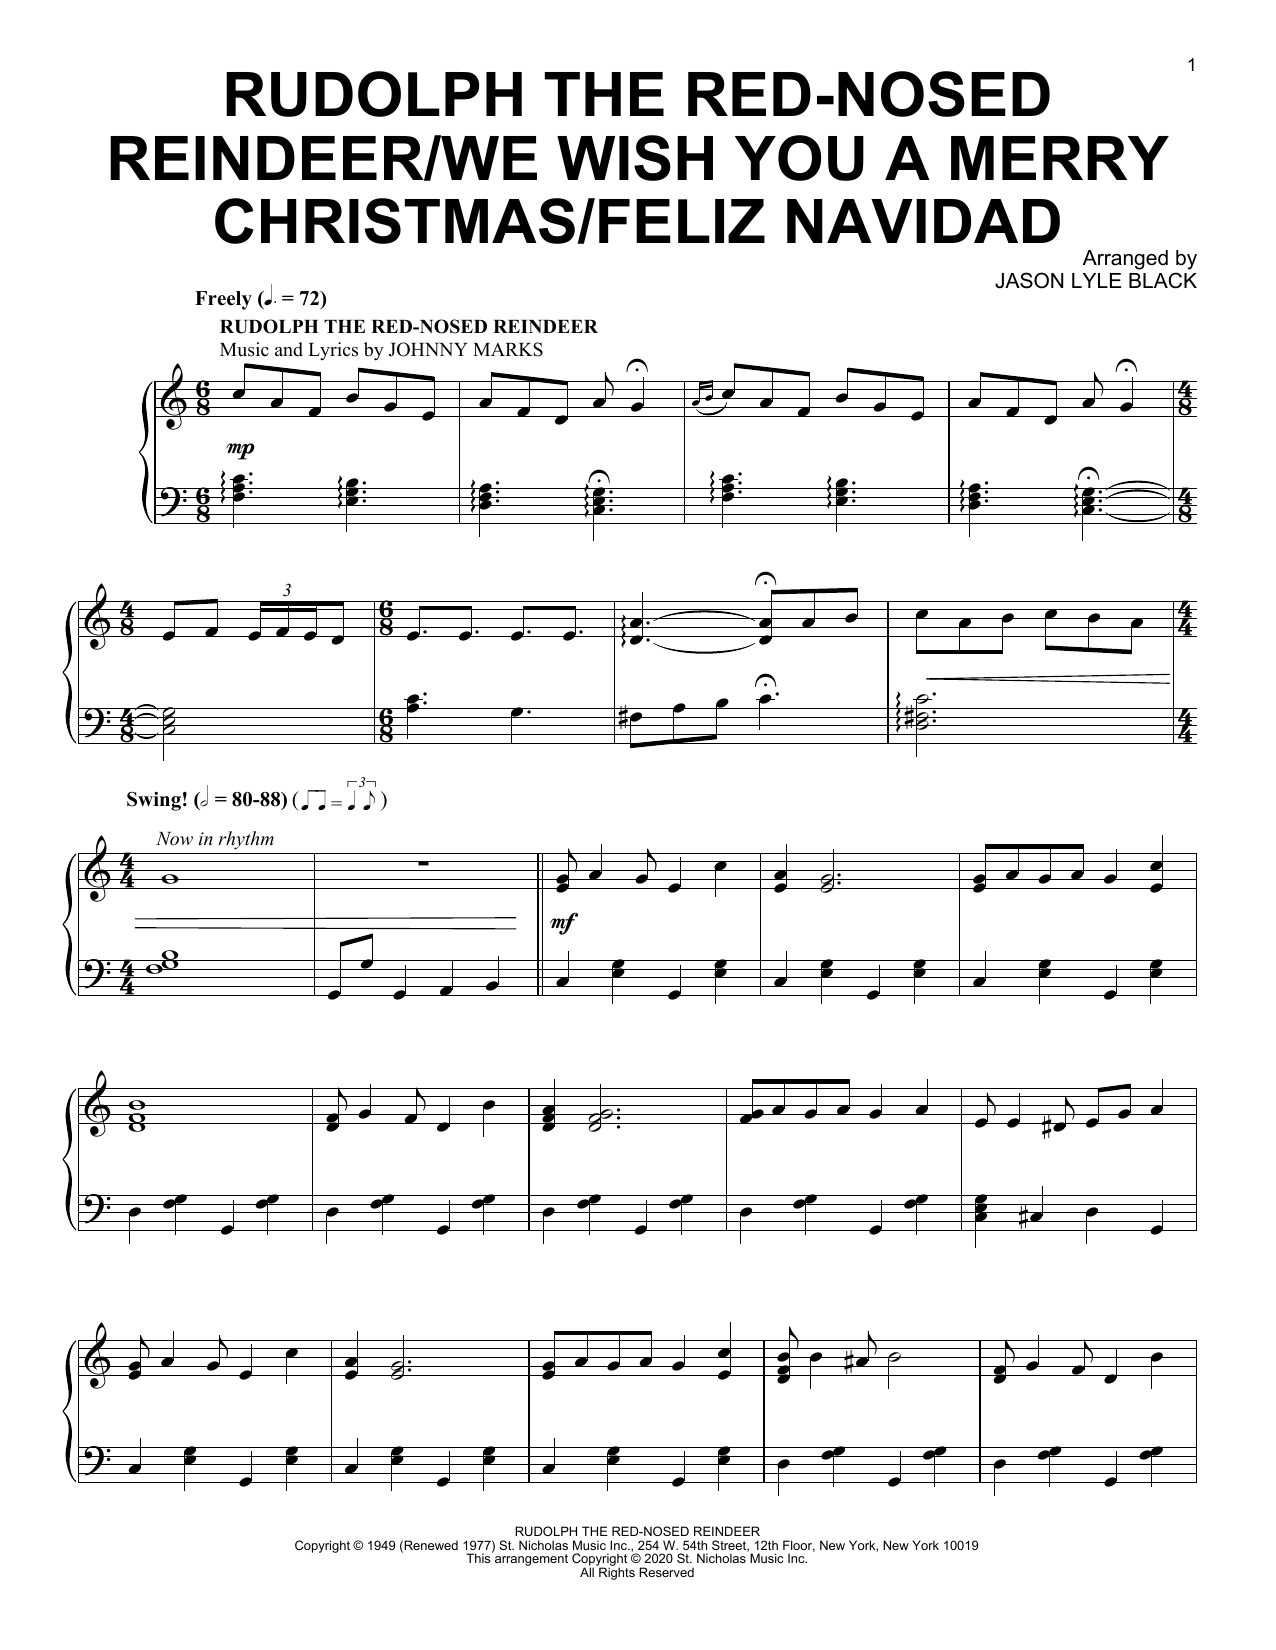 Download Jason Lyle Black Rudolph The Red-Nosed Reindeer/We Wish Sheet Music